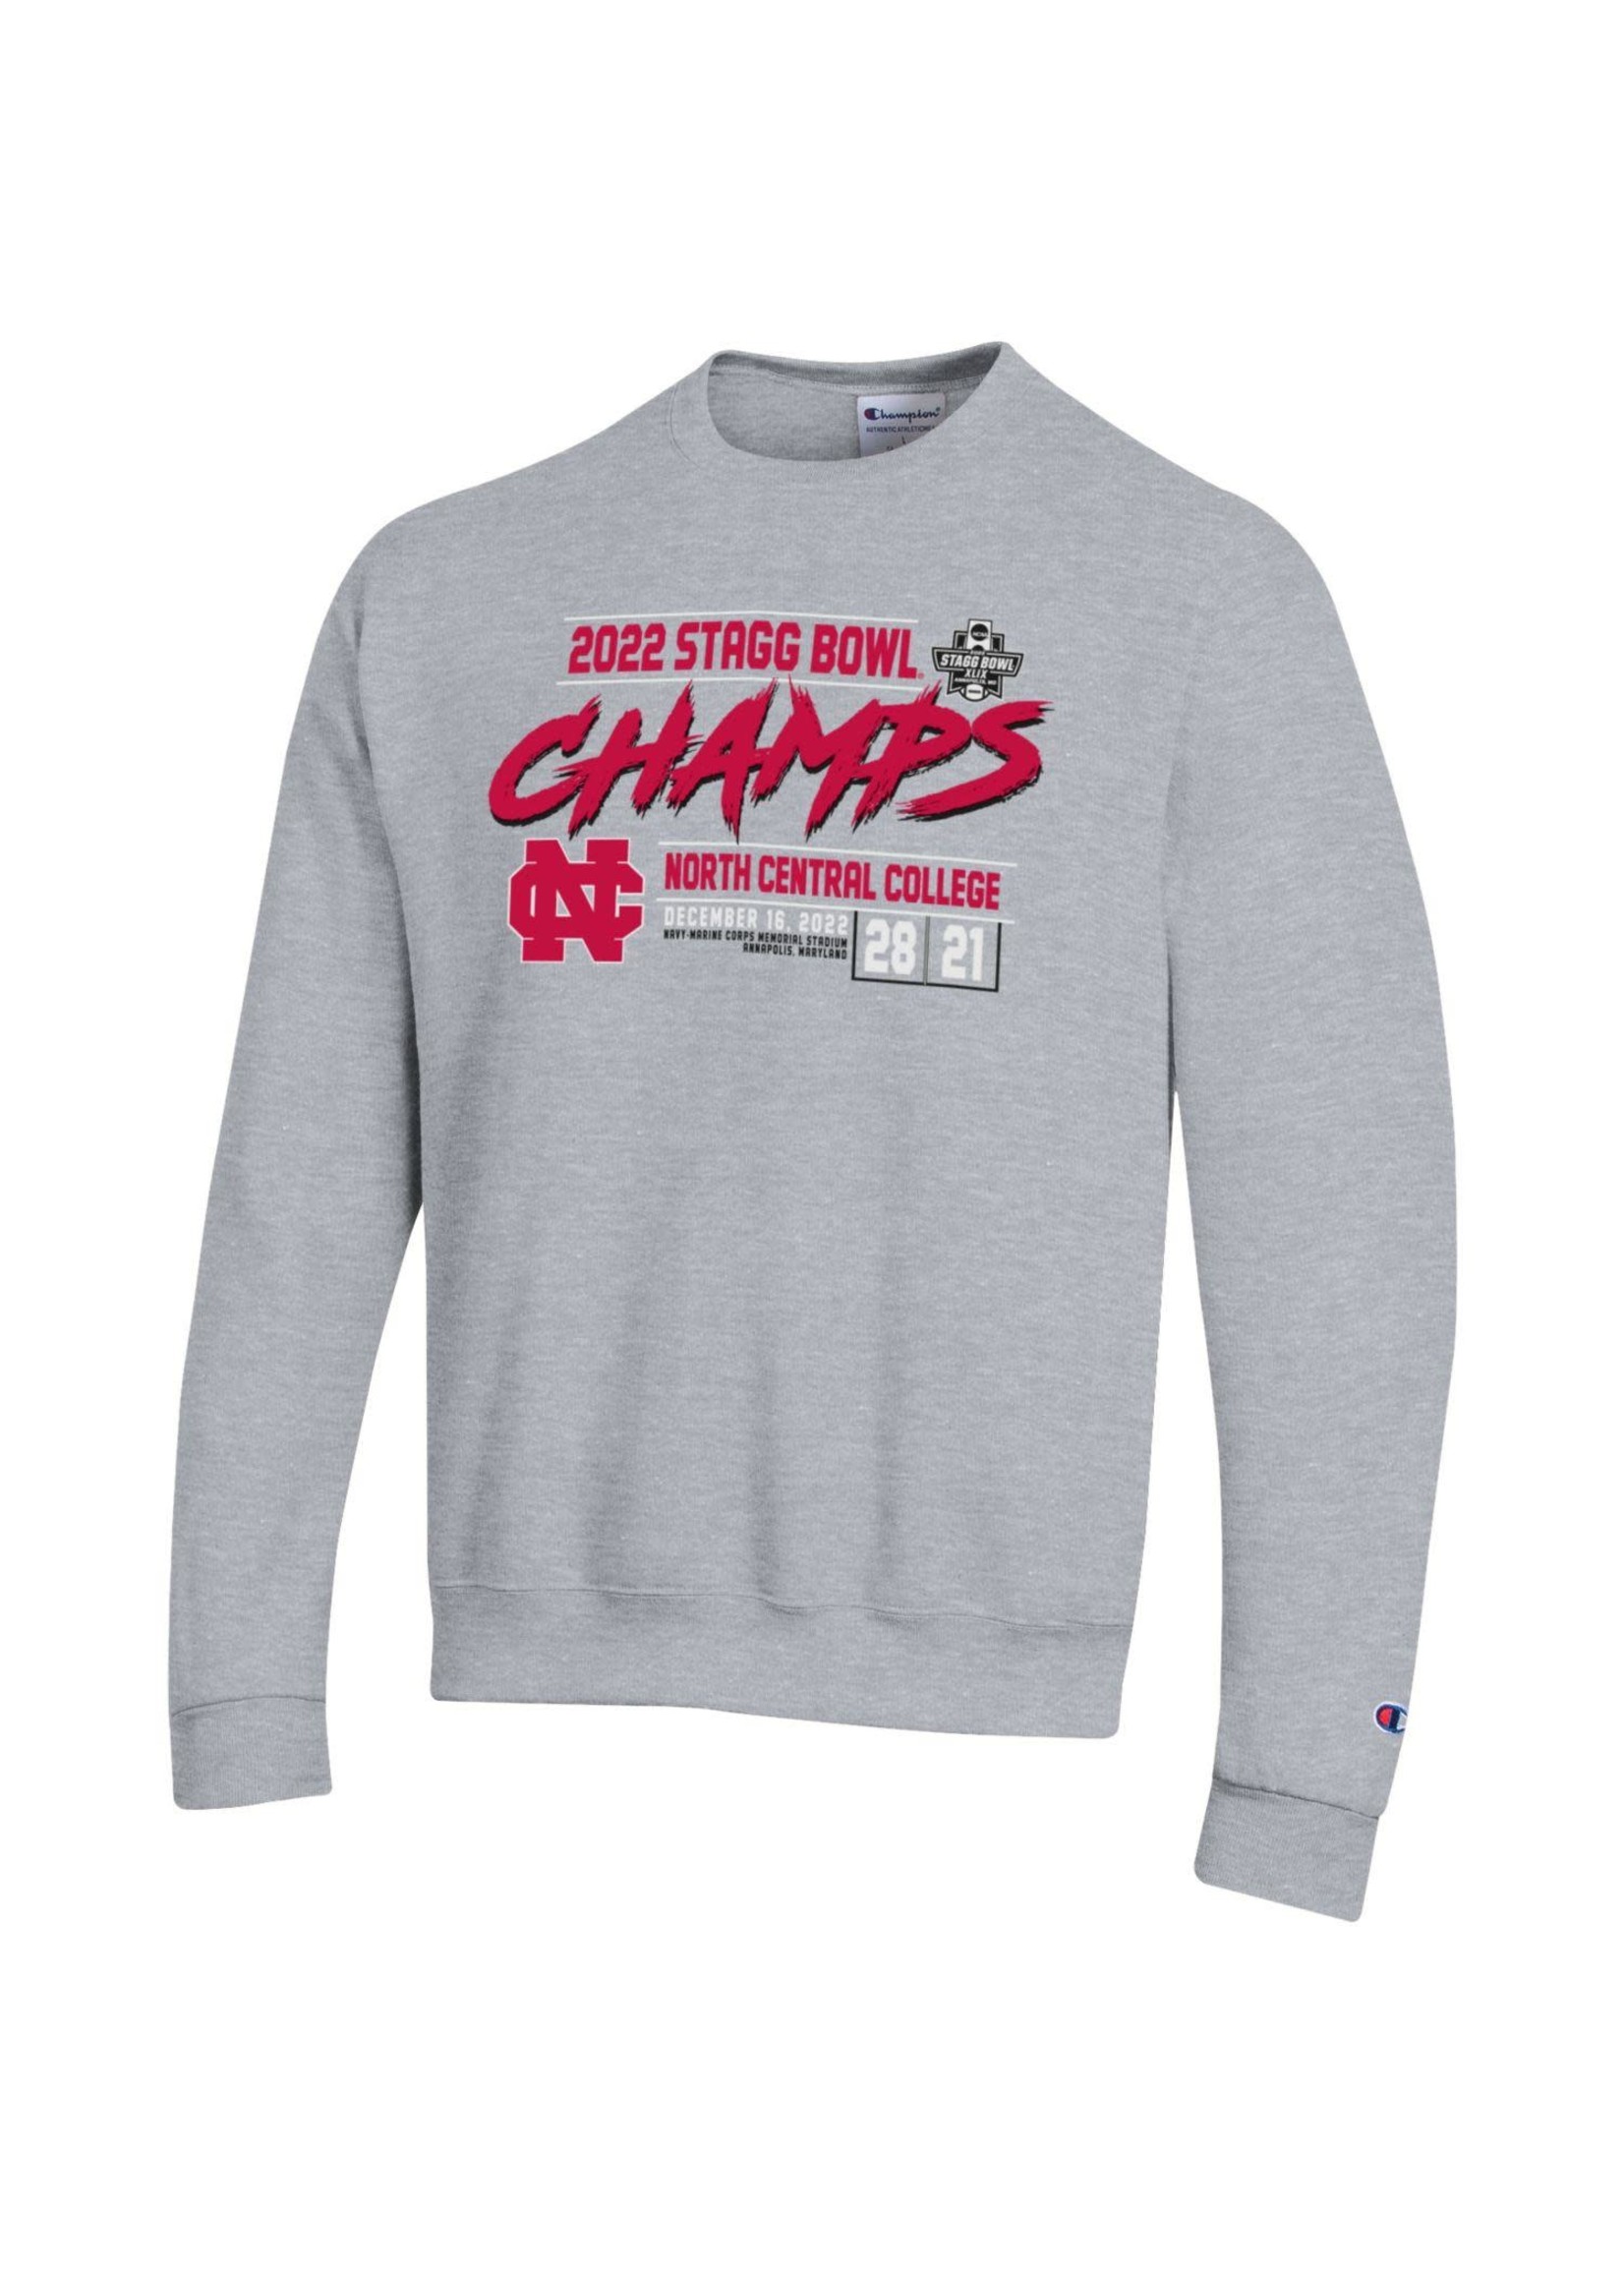 2022 Stagg Bowl Crew by Champion - North Central College Campus Store